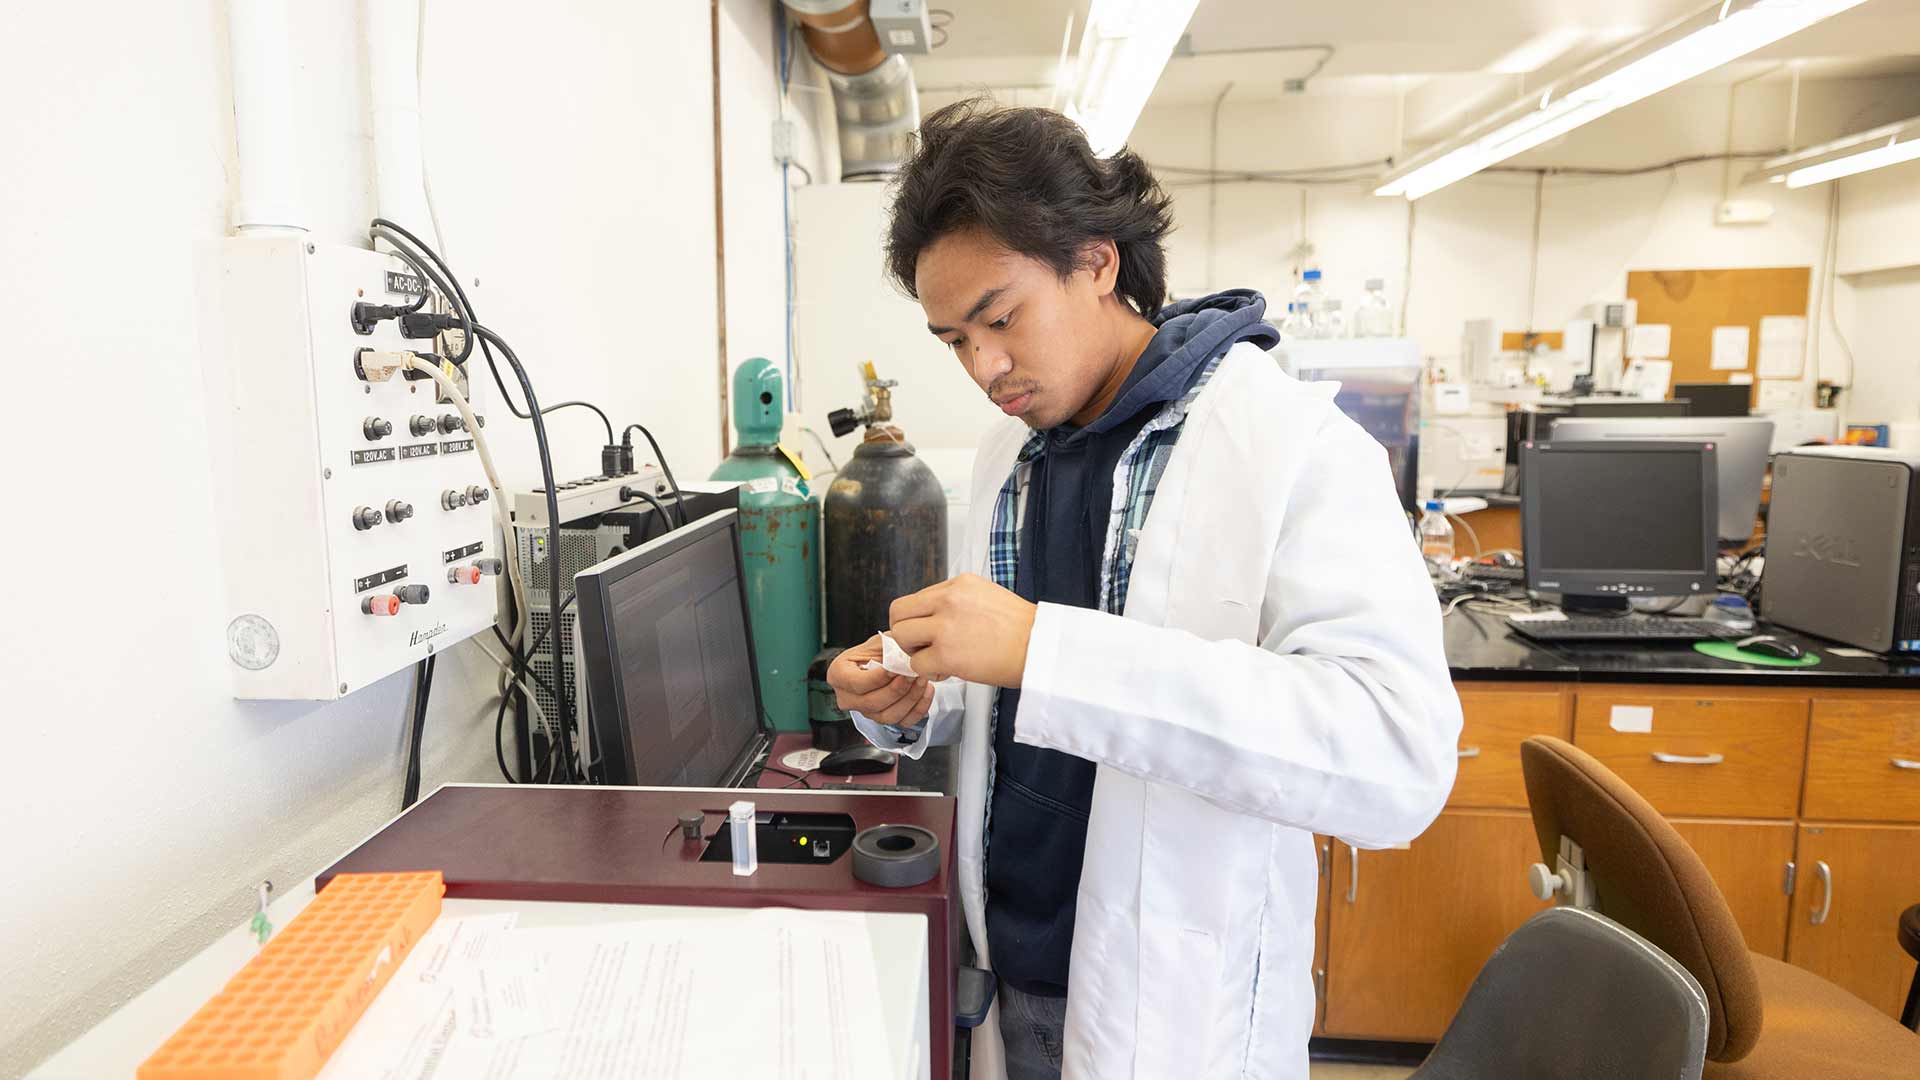 A student in a white lab coat handles chemical supplies in a lab.